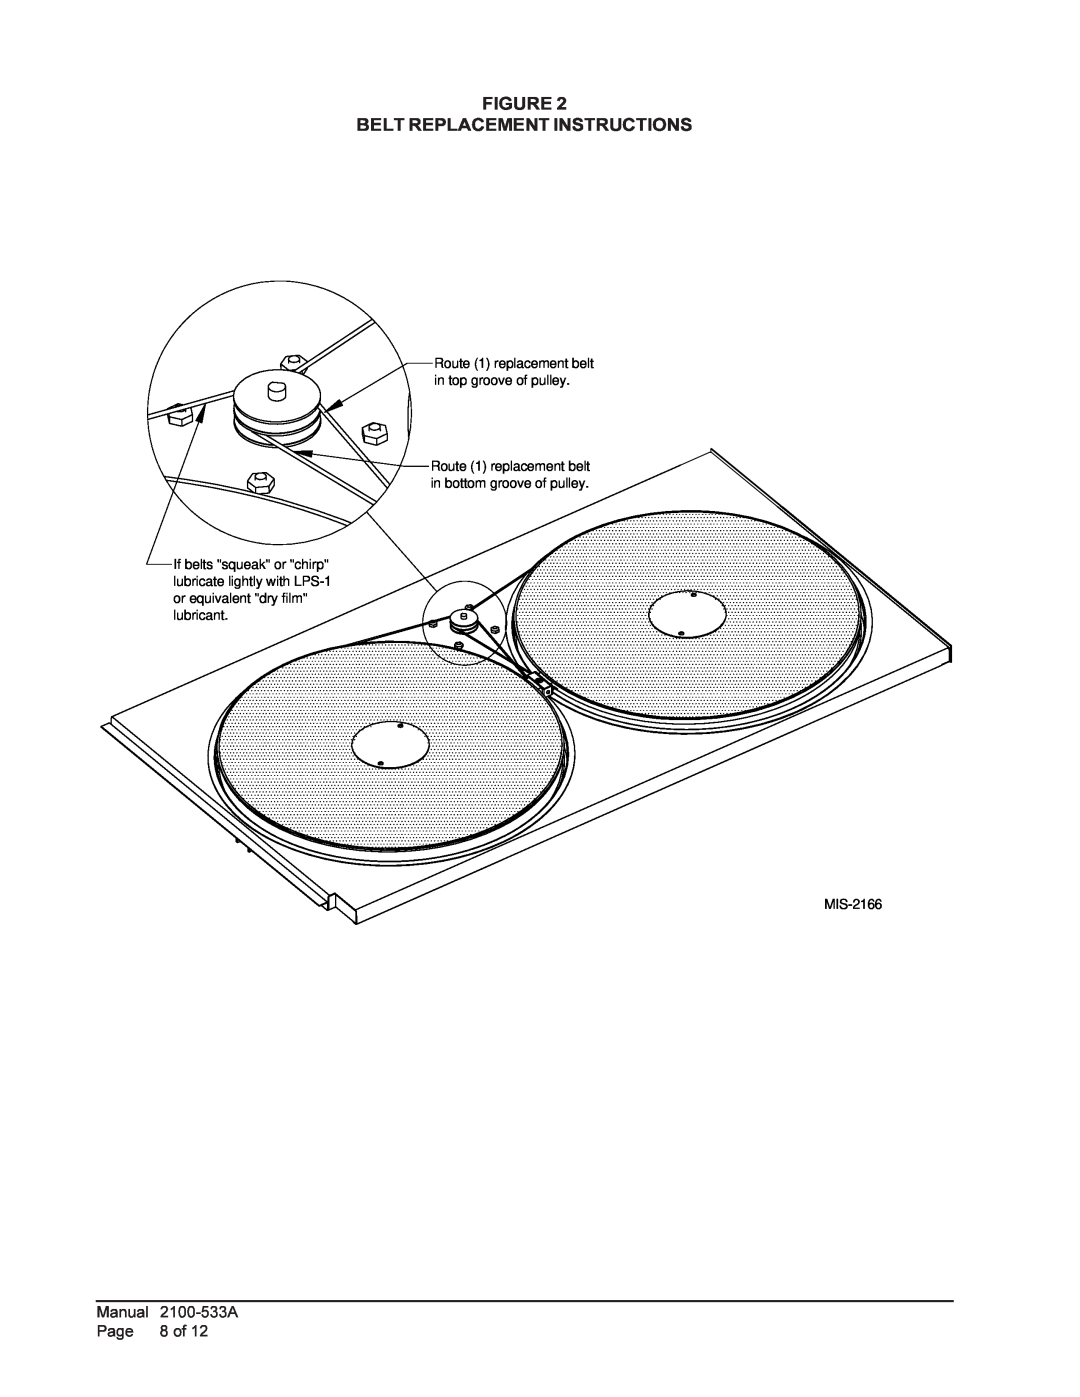 Bard 920-0074 qwserv Belt Replacement Instructions, MIS-2166, 2100-533A, Route 1 replacement belt in top groove of pulley 